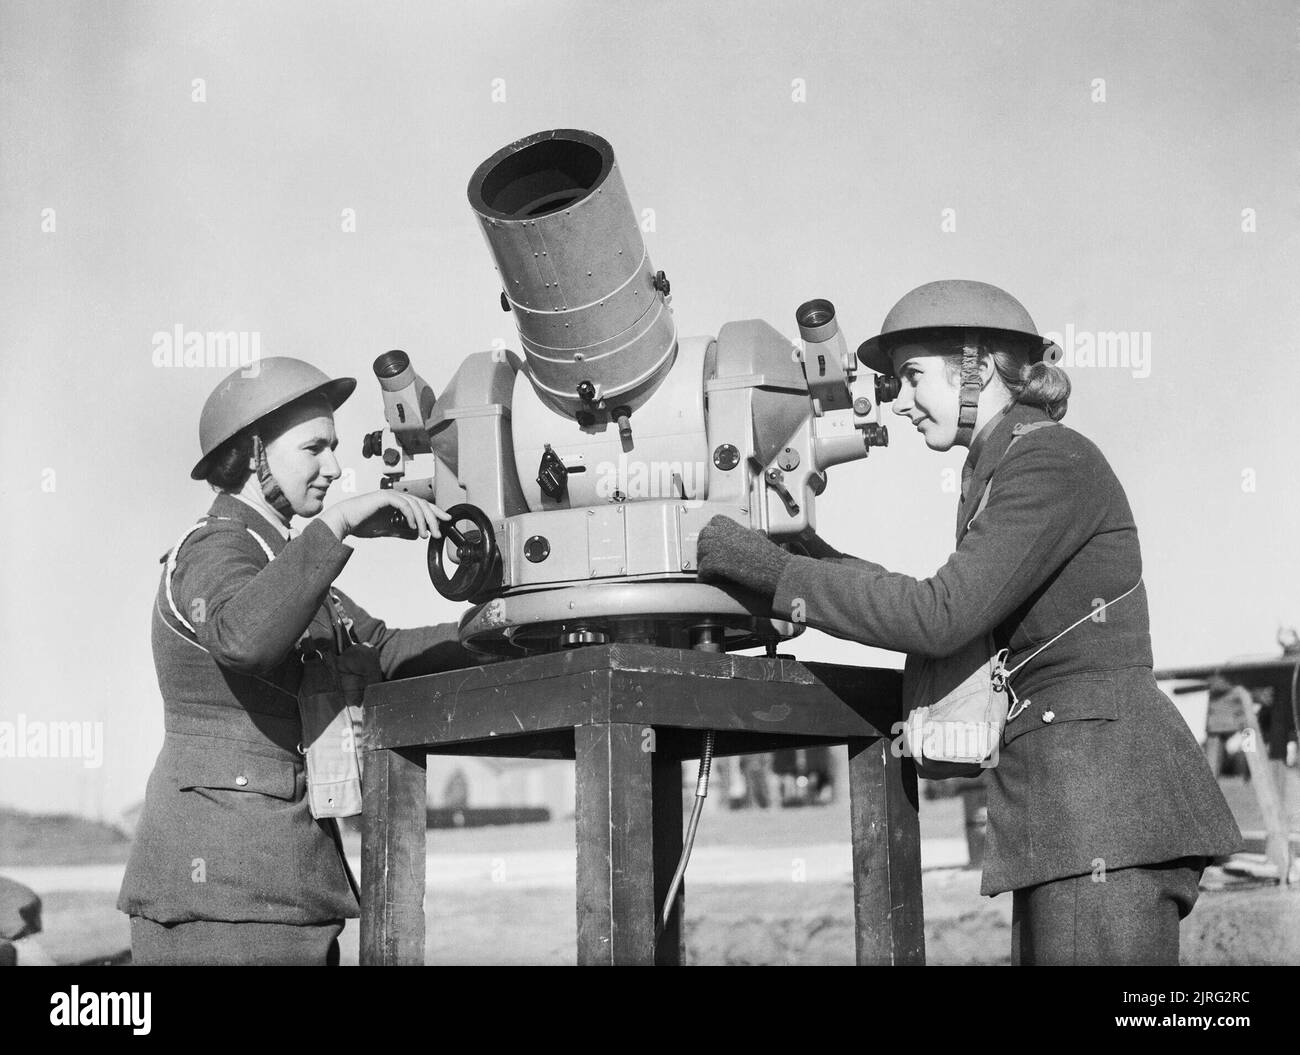 Two members of the Auxiliary Territorial Service (ATS) check the accuracy of anti-aircraft fire from a gun battery during the Second World War. The Auxiliary Territorial Service (ATS): Using a Kine-Theodolite - an instrument which records on film the bursts of anti-aircraft shells - two ATS women check the accuracy of the firing at an AA Battery at Manorbier. Stock Photo